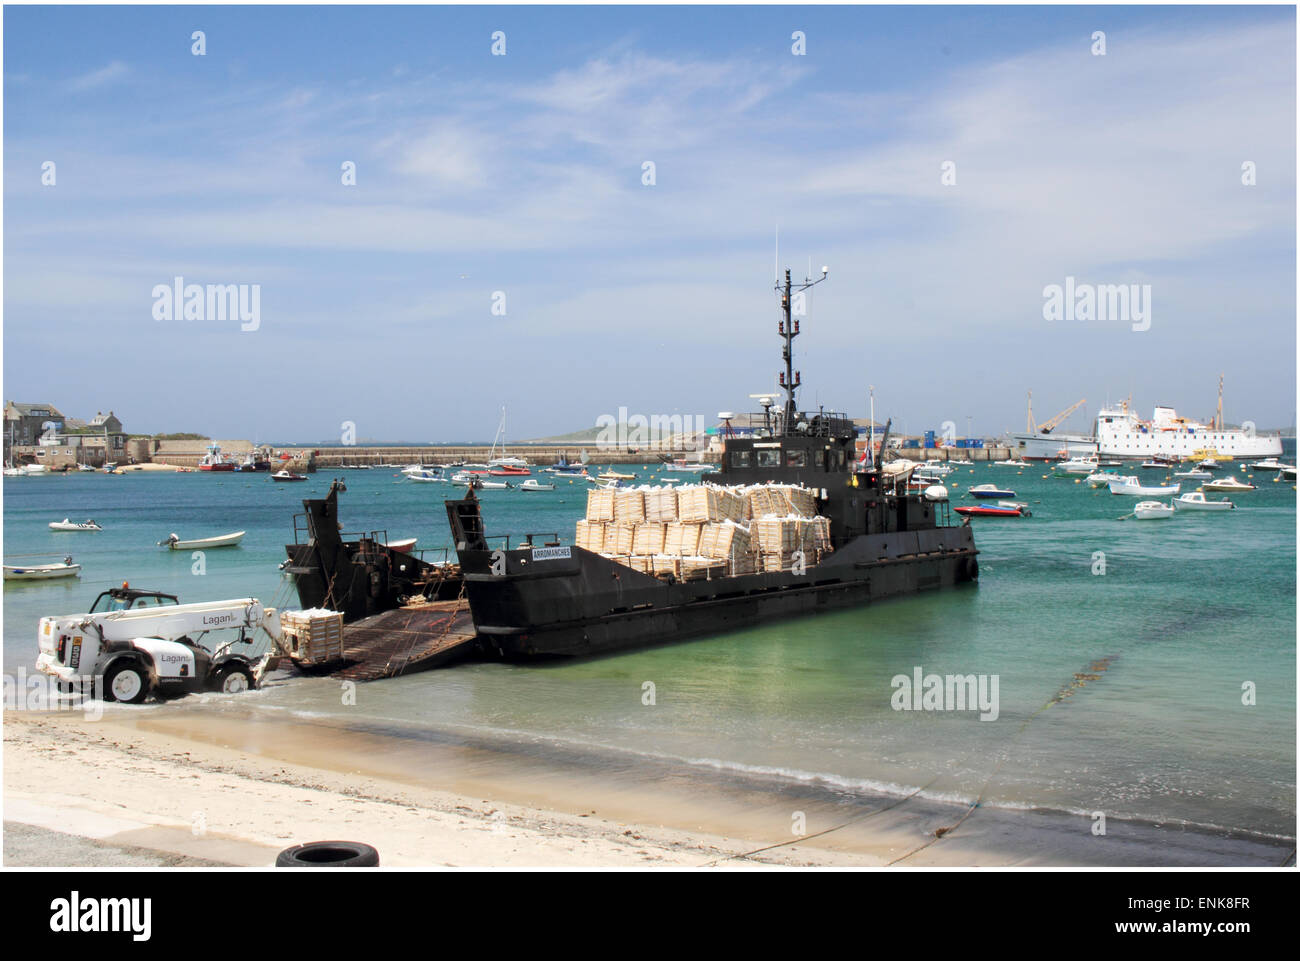 Flat bottomed landing craft delivering freight on St Marys,Isles of Scilly  Stock Photo - Alamy